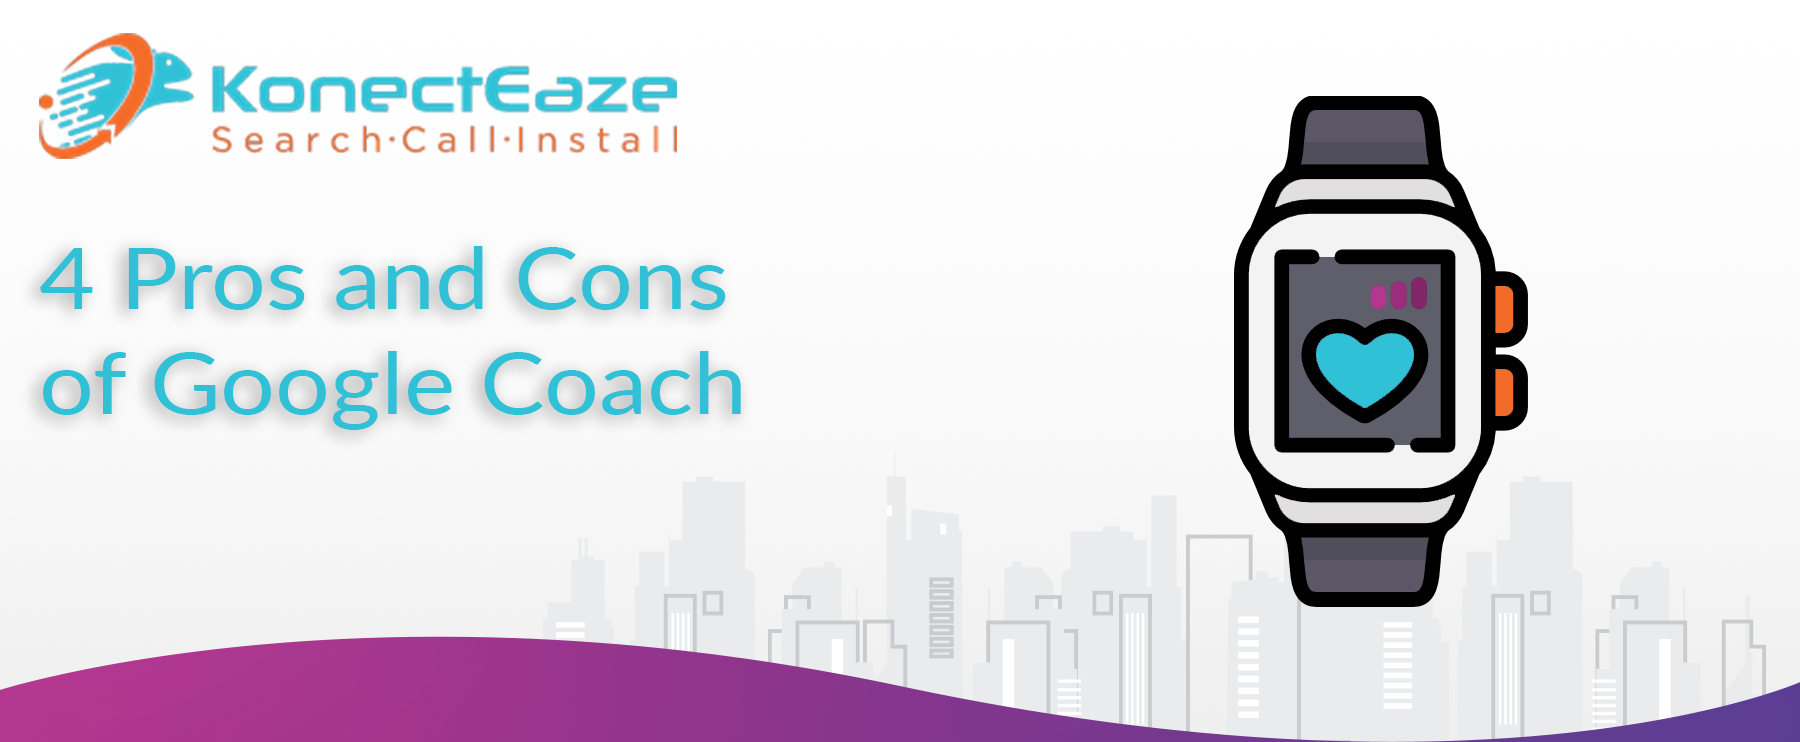 4 Pros and Cons of Google Coach